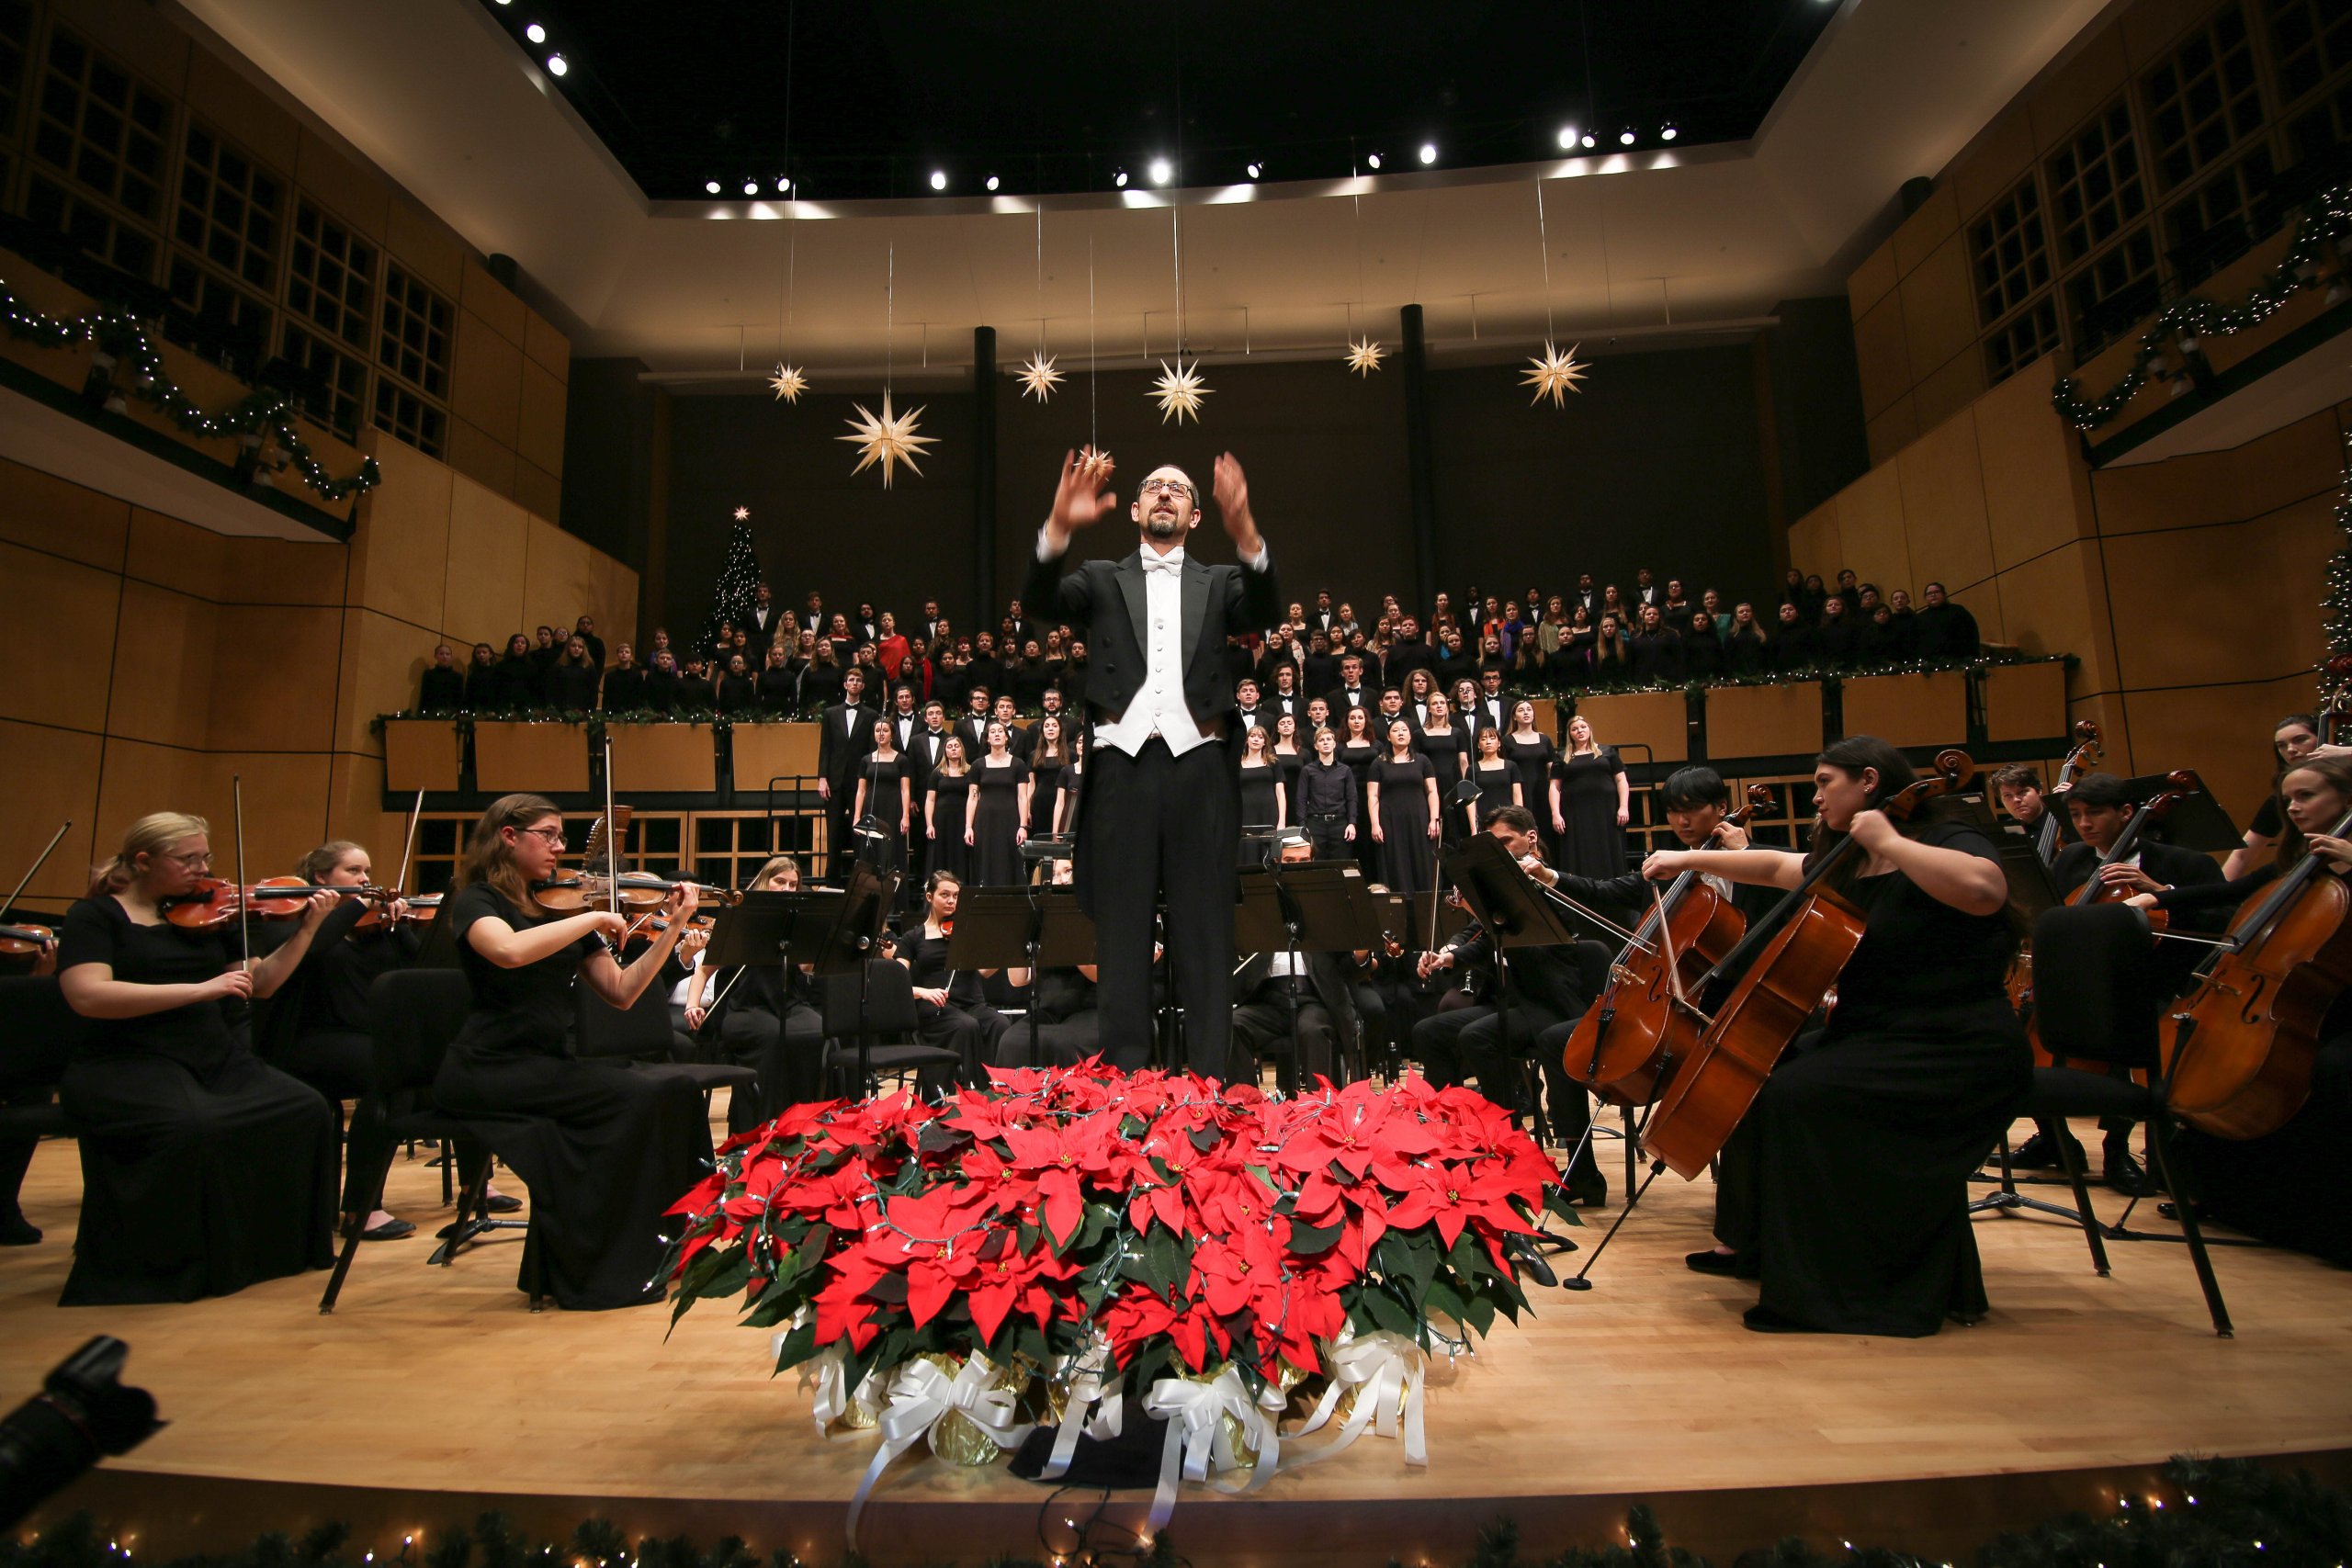 Goshen College’s 'A Festival of Carols' to be televised across Indiana